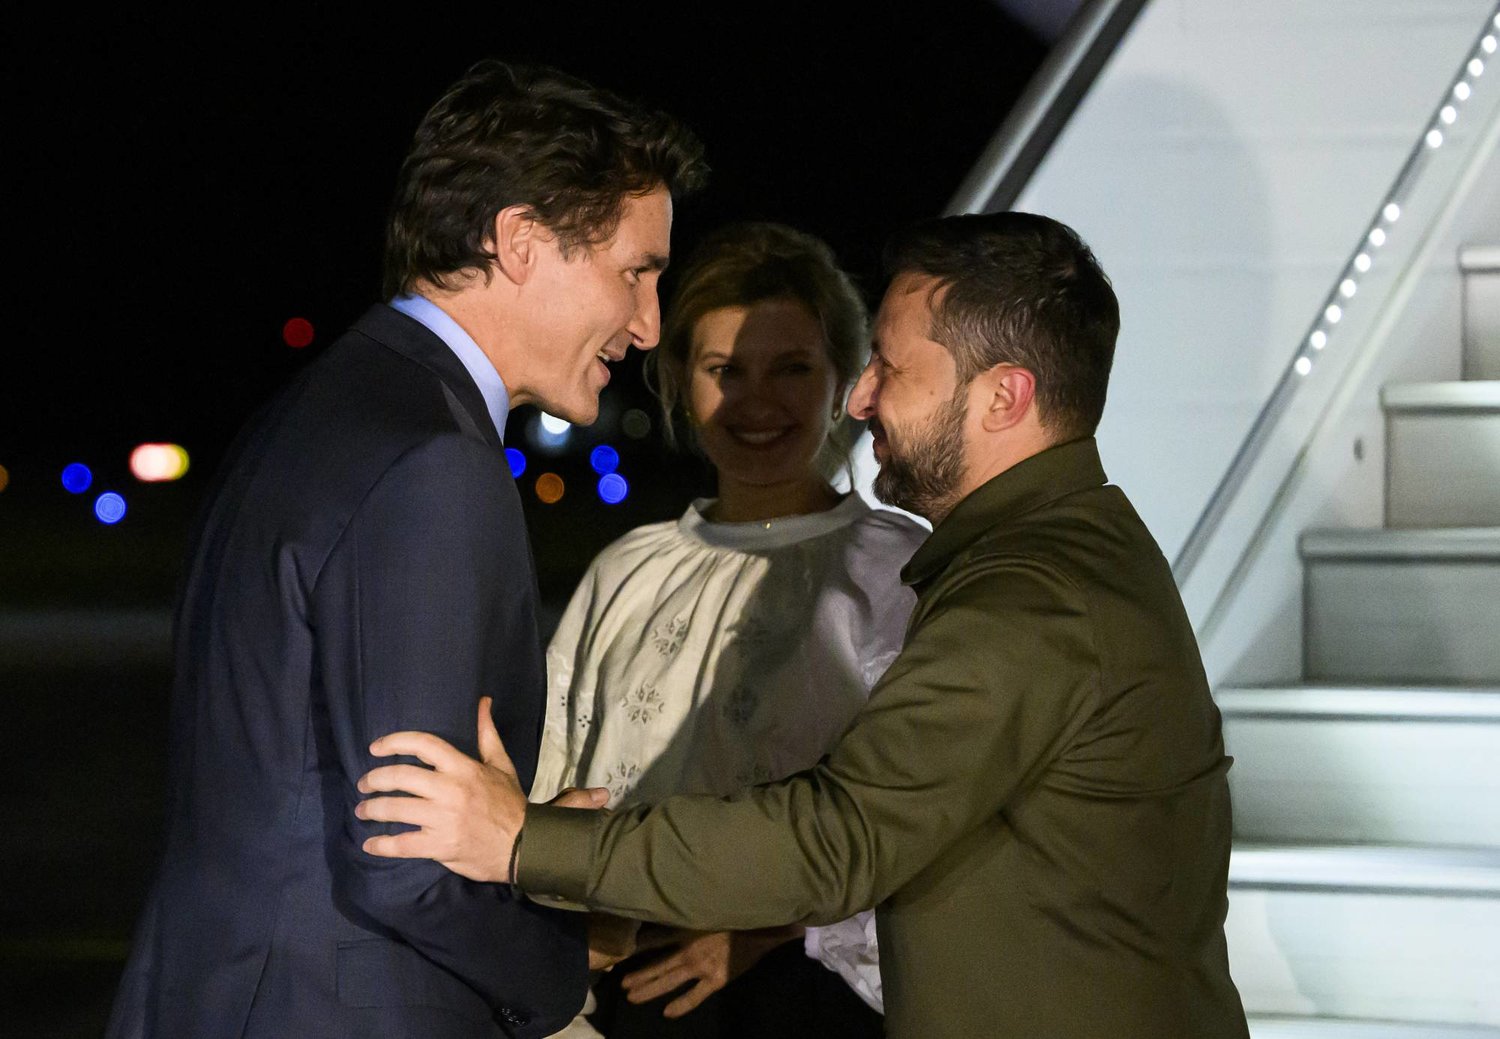 Canadian Prime Minister Justin Trudeau, left, greets Ukrainian President Volodymyr Zelenskyy, right, as his wife Olena Zelenska looks on as they arrive at Ottawa Macdonald-Cartier International Airport in Ottawa, Ontario, on Thursday, Sept. 21, 2023. (Justin Tang/The Canadian Press via AP)